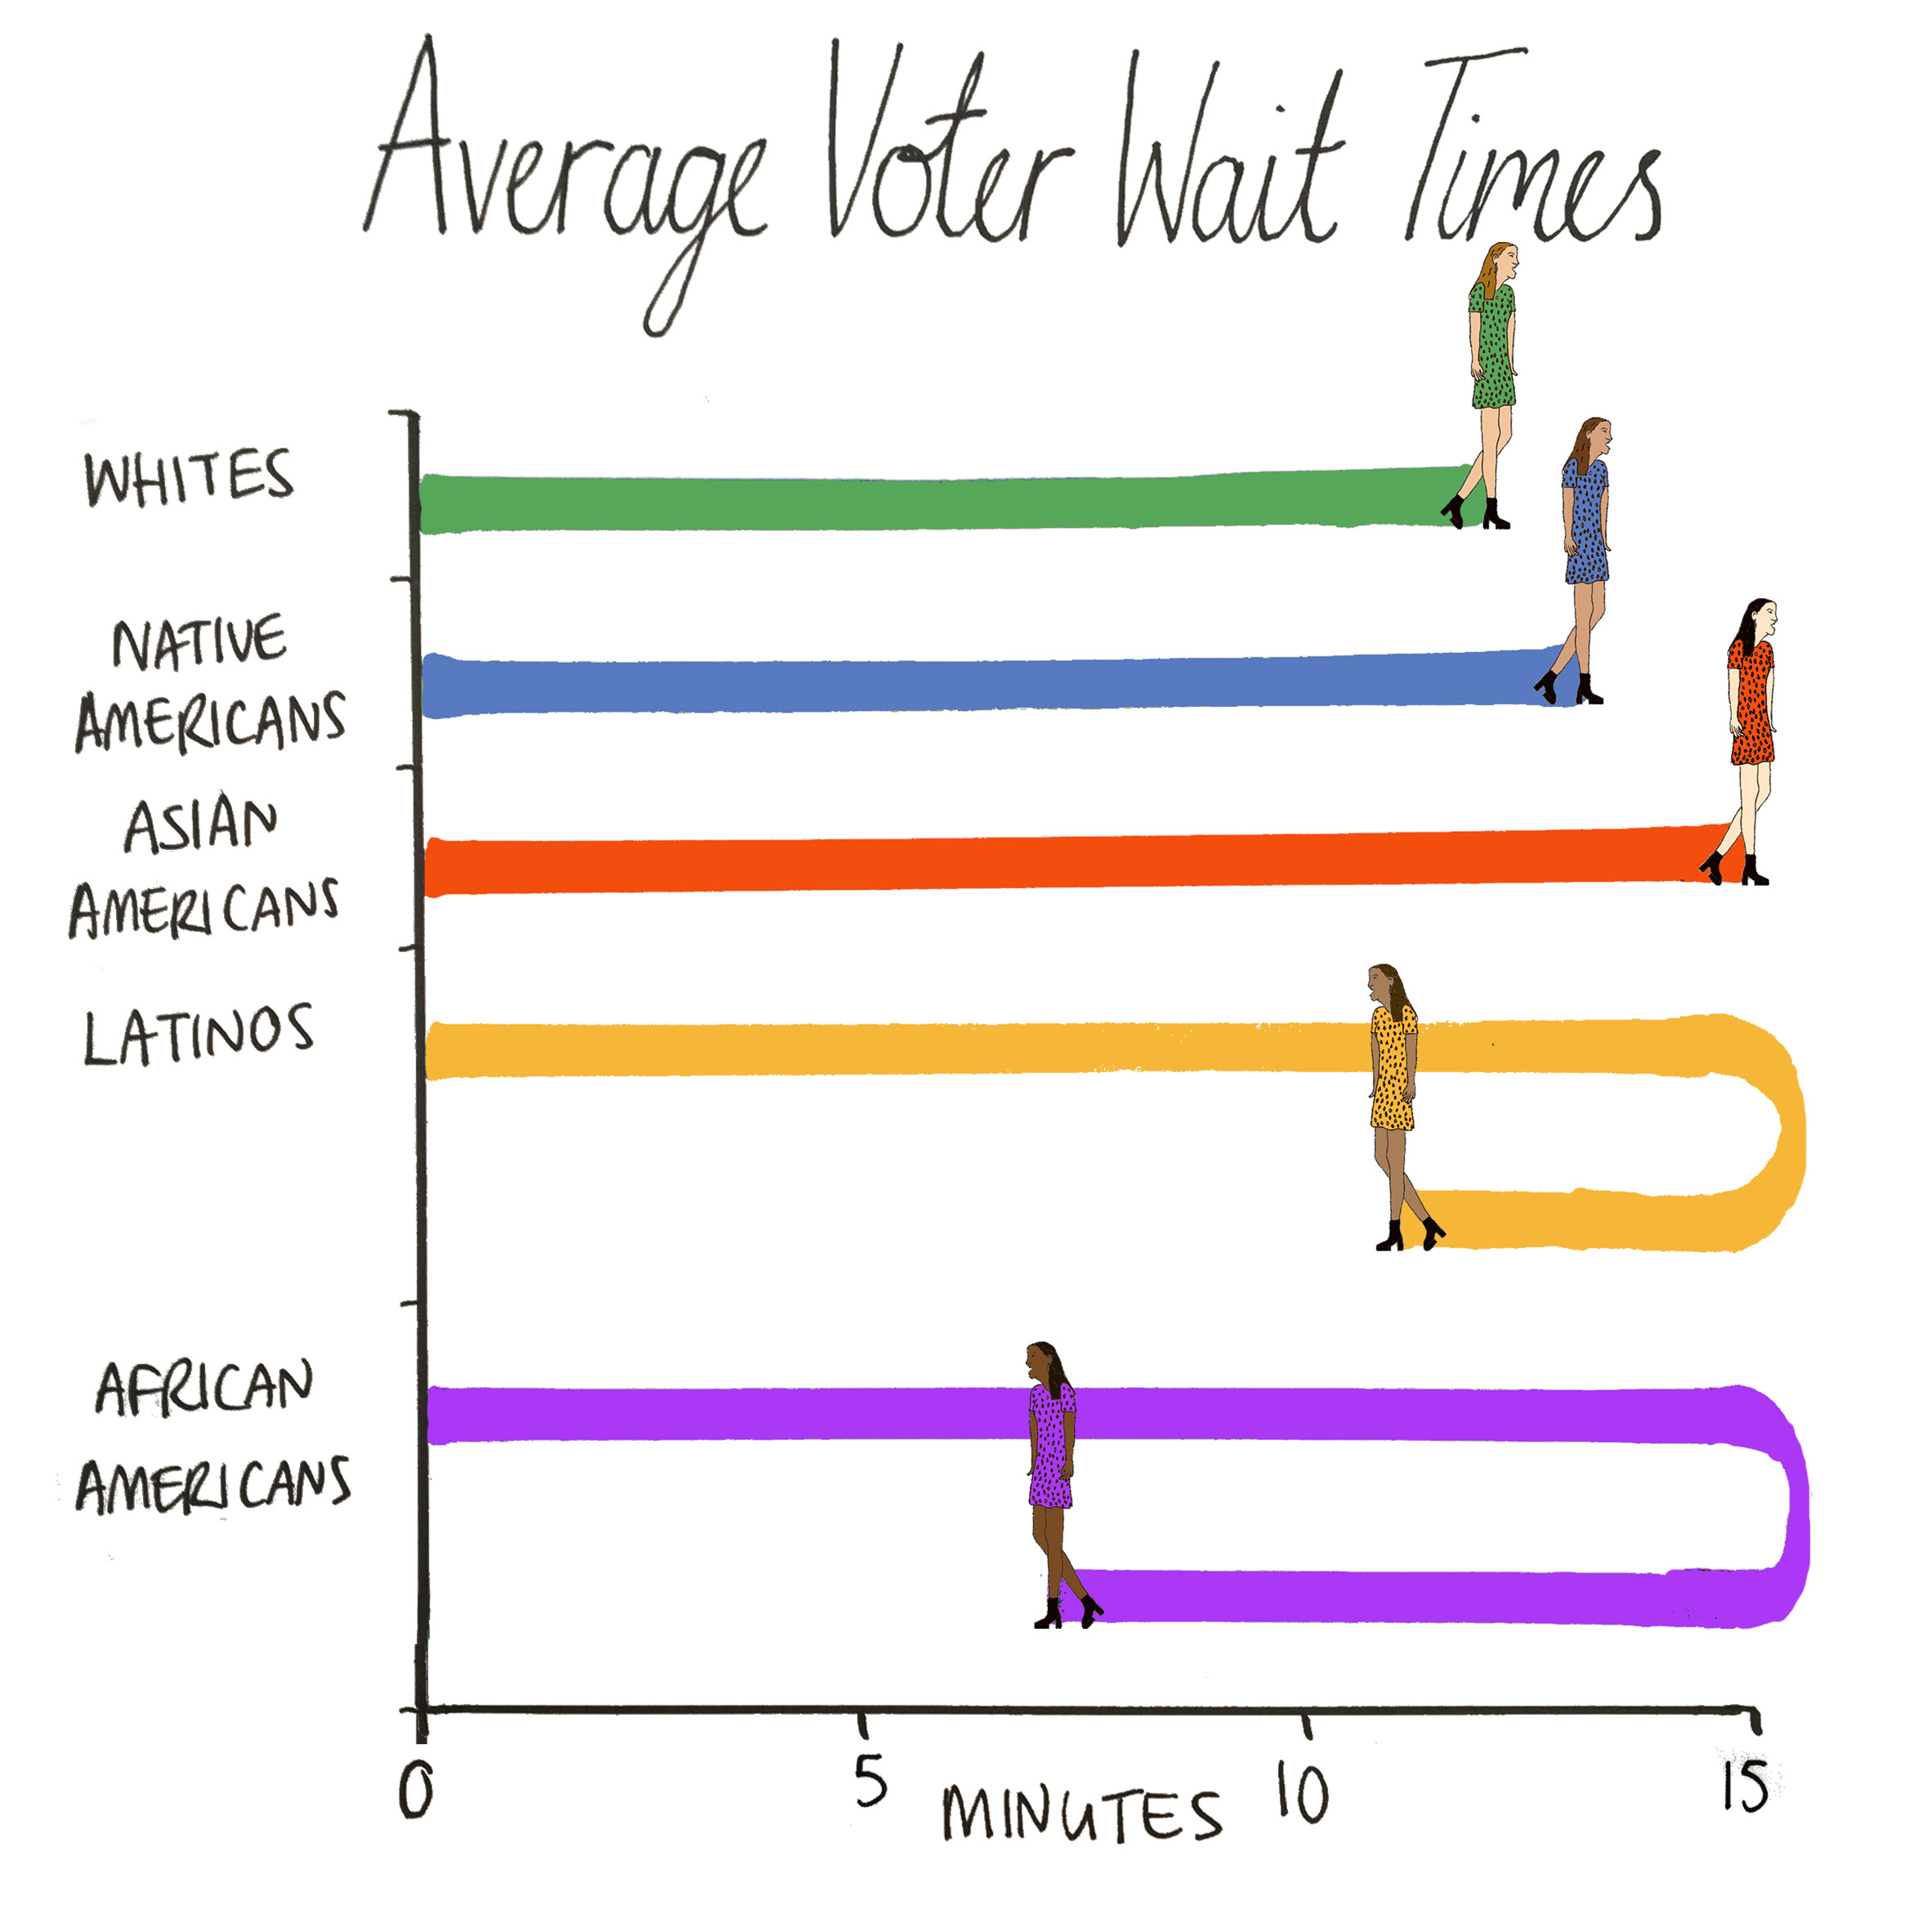 Graphic showing average voter wait times by race